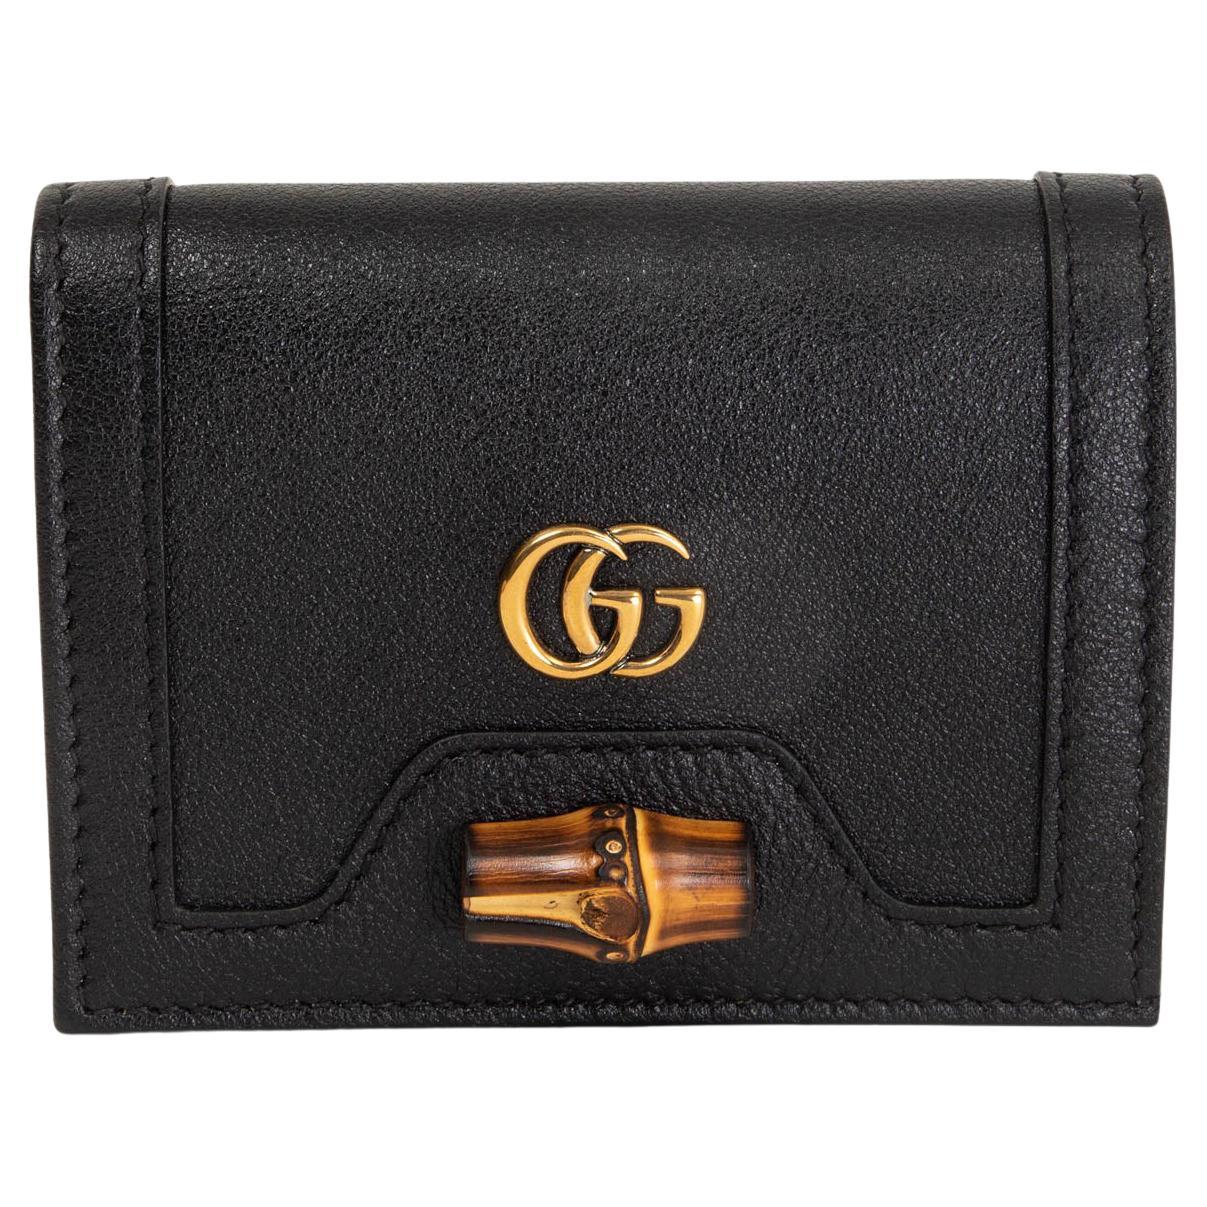 GUCCI black leather BAMBOO DETAIL MINI Wallet